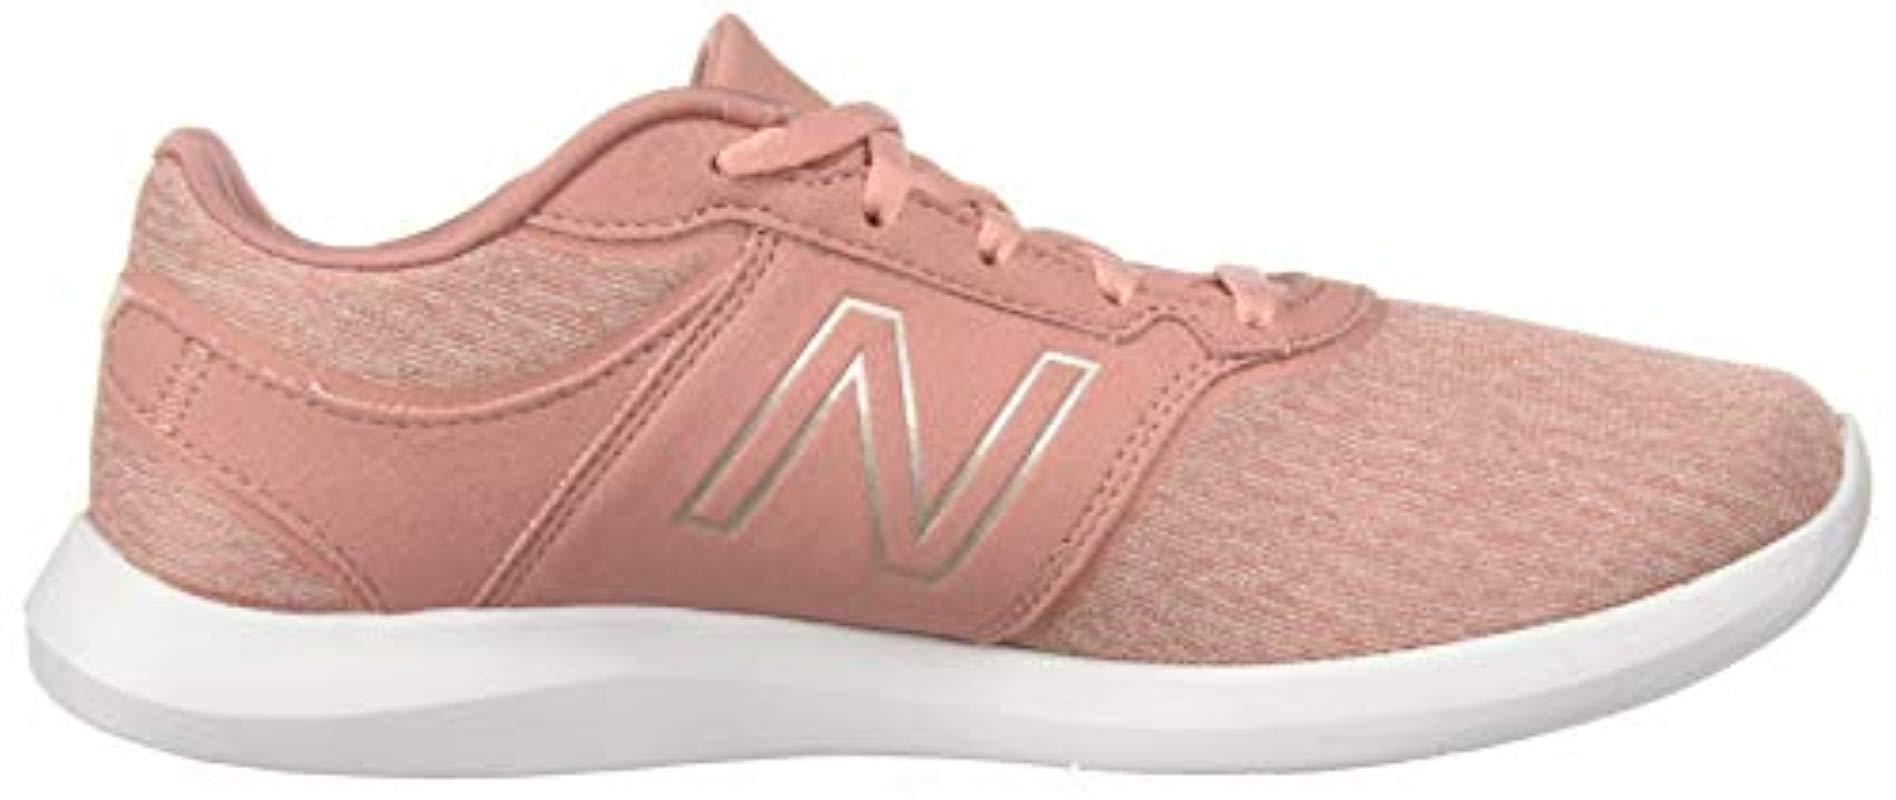 New Balance 415v1 Cush Sneaker in Pink - Save 66% - Lyst